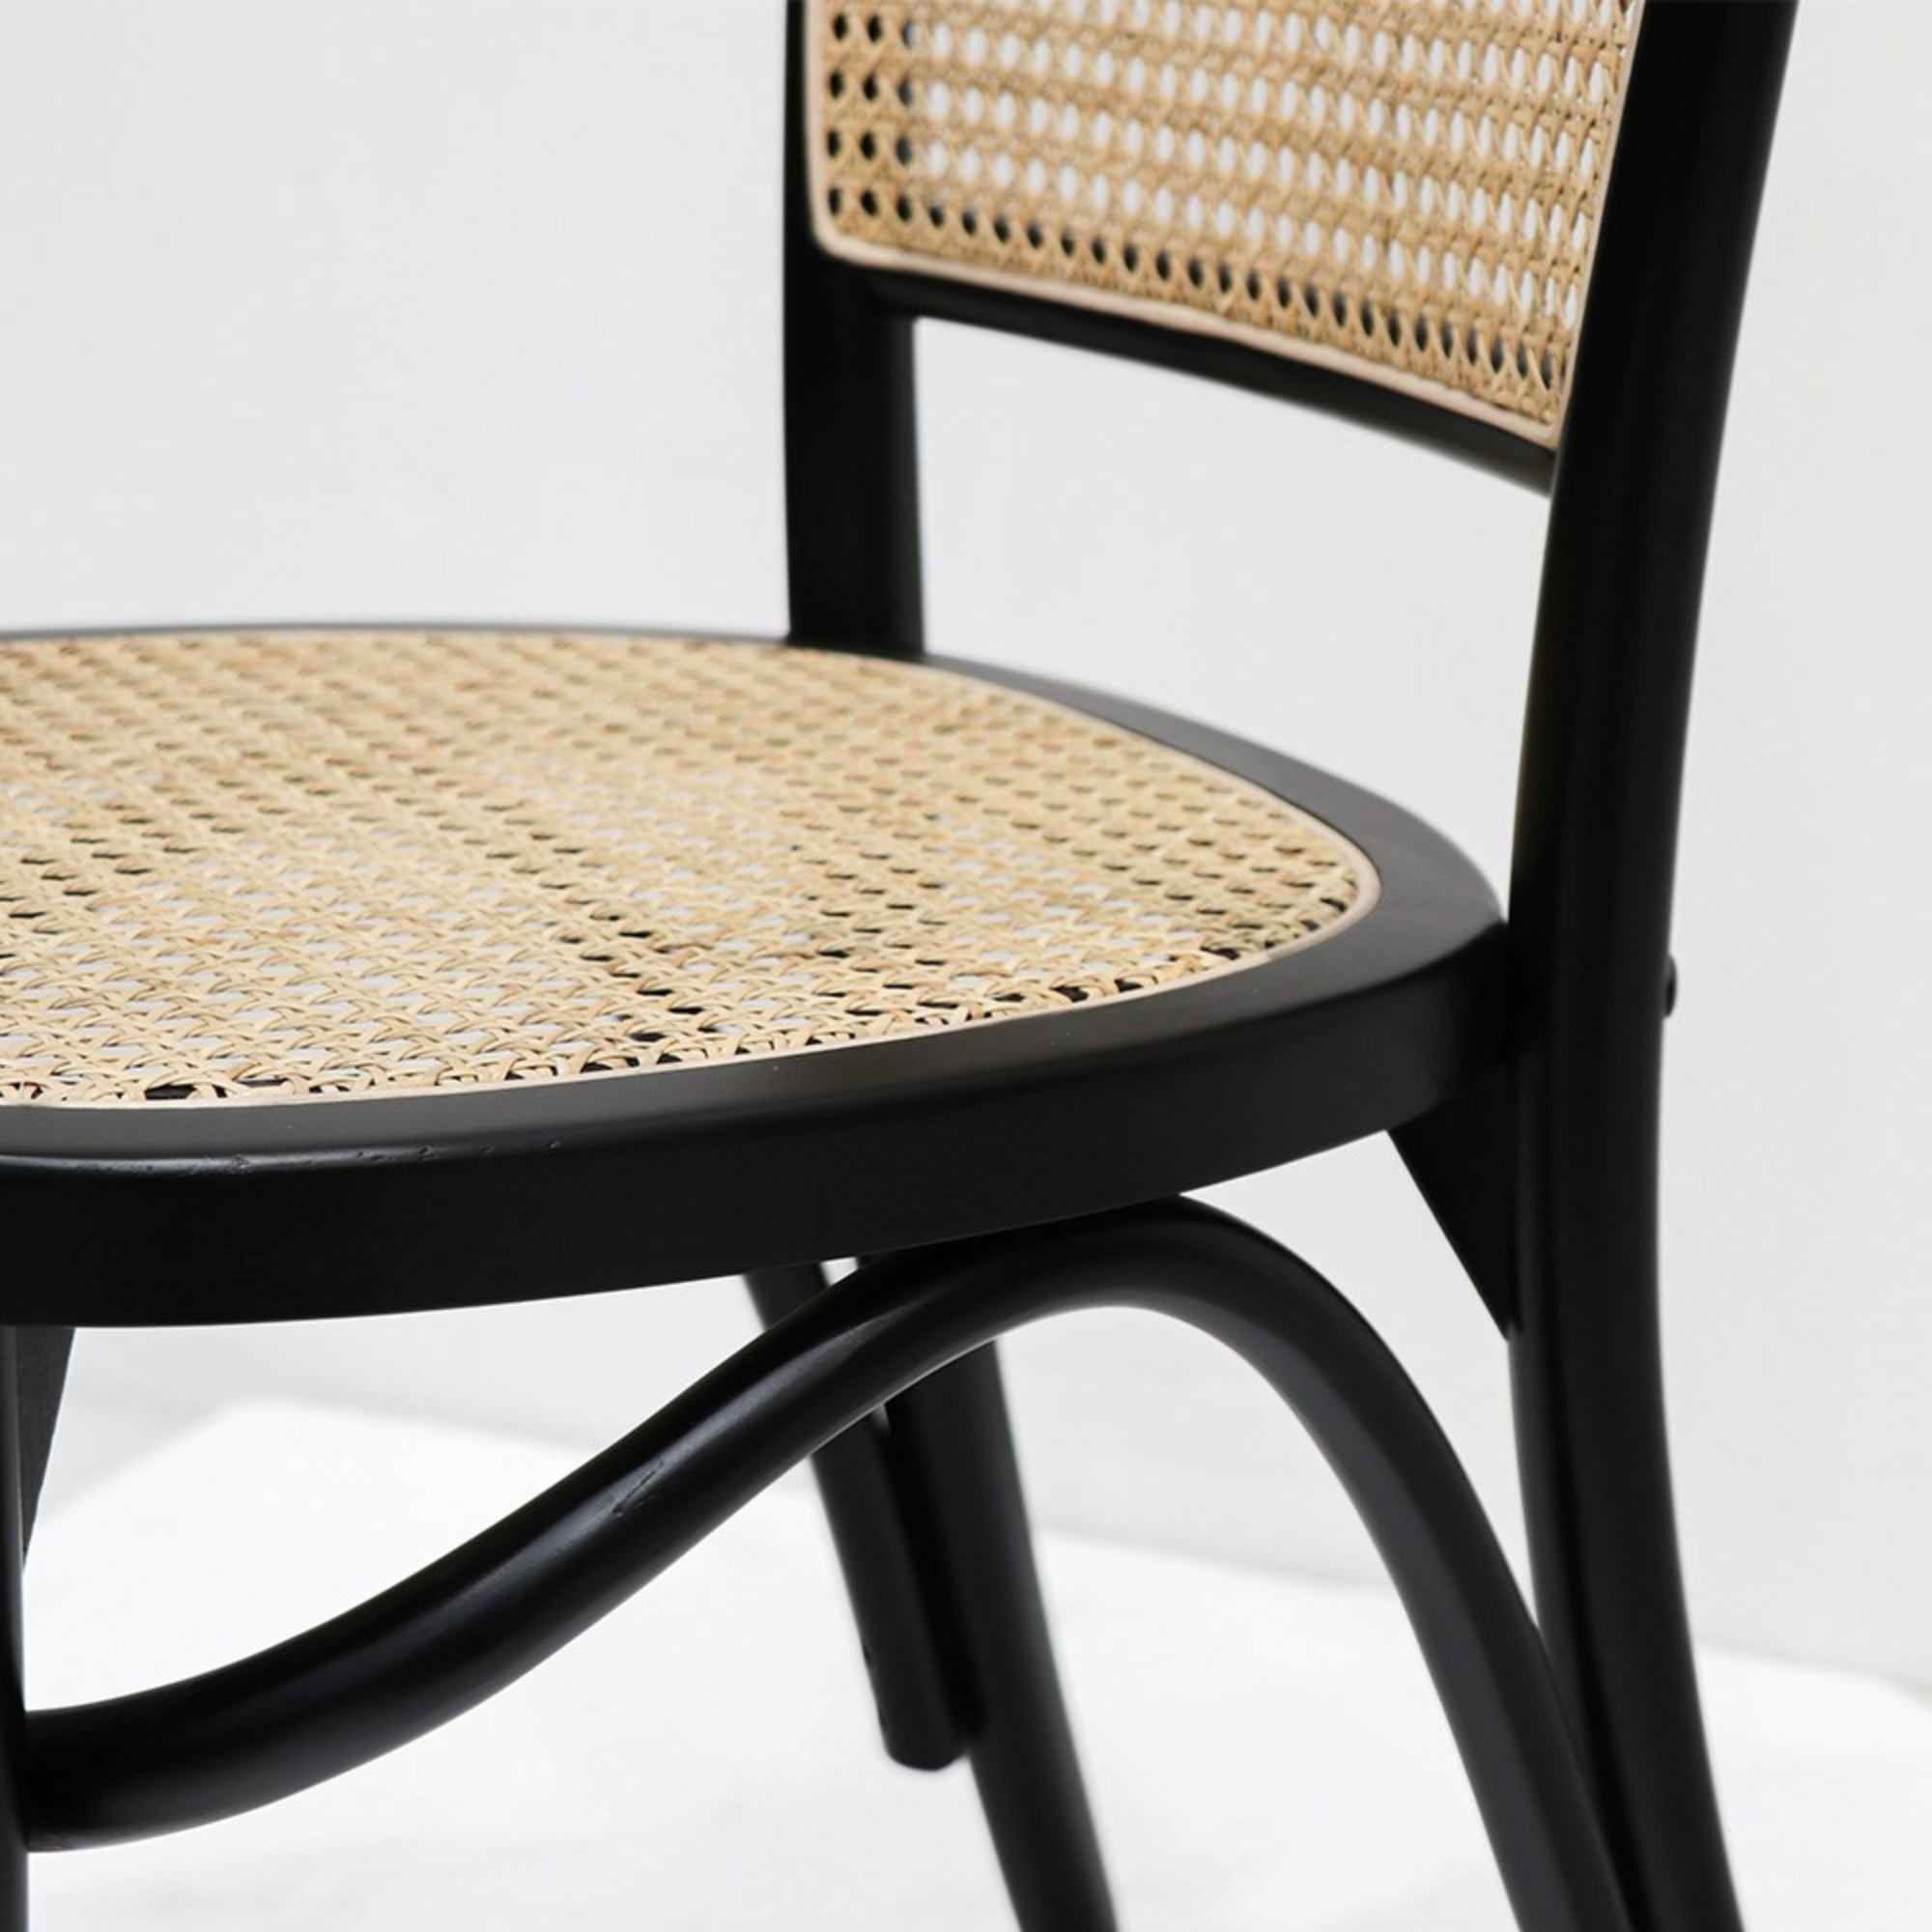 BENTWOOD RATTAN DINING CHAIR | 2 COLOURS